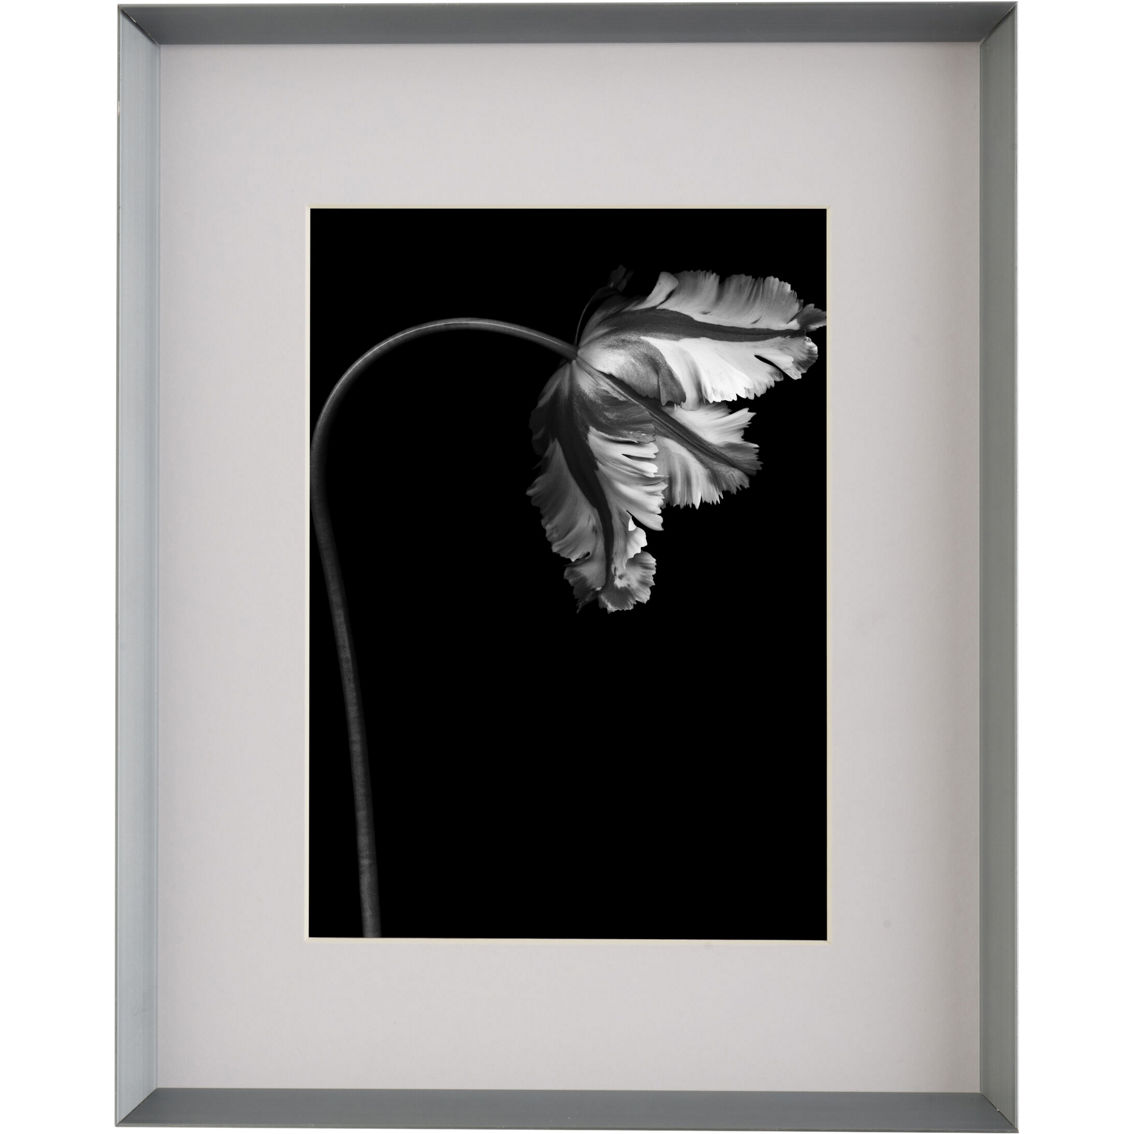 Mikasa Silver Metal Portrait 8 x 10 in. Frame Matted to 5 x 7 in. - Image 2 of 5